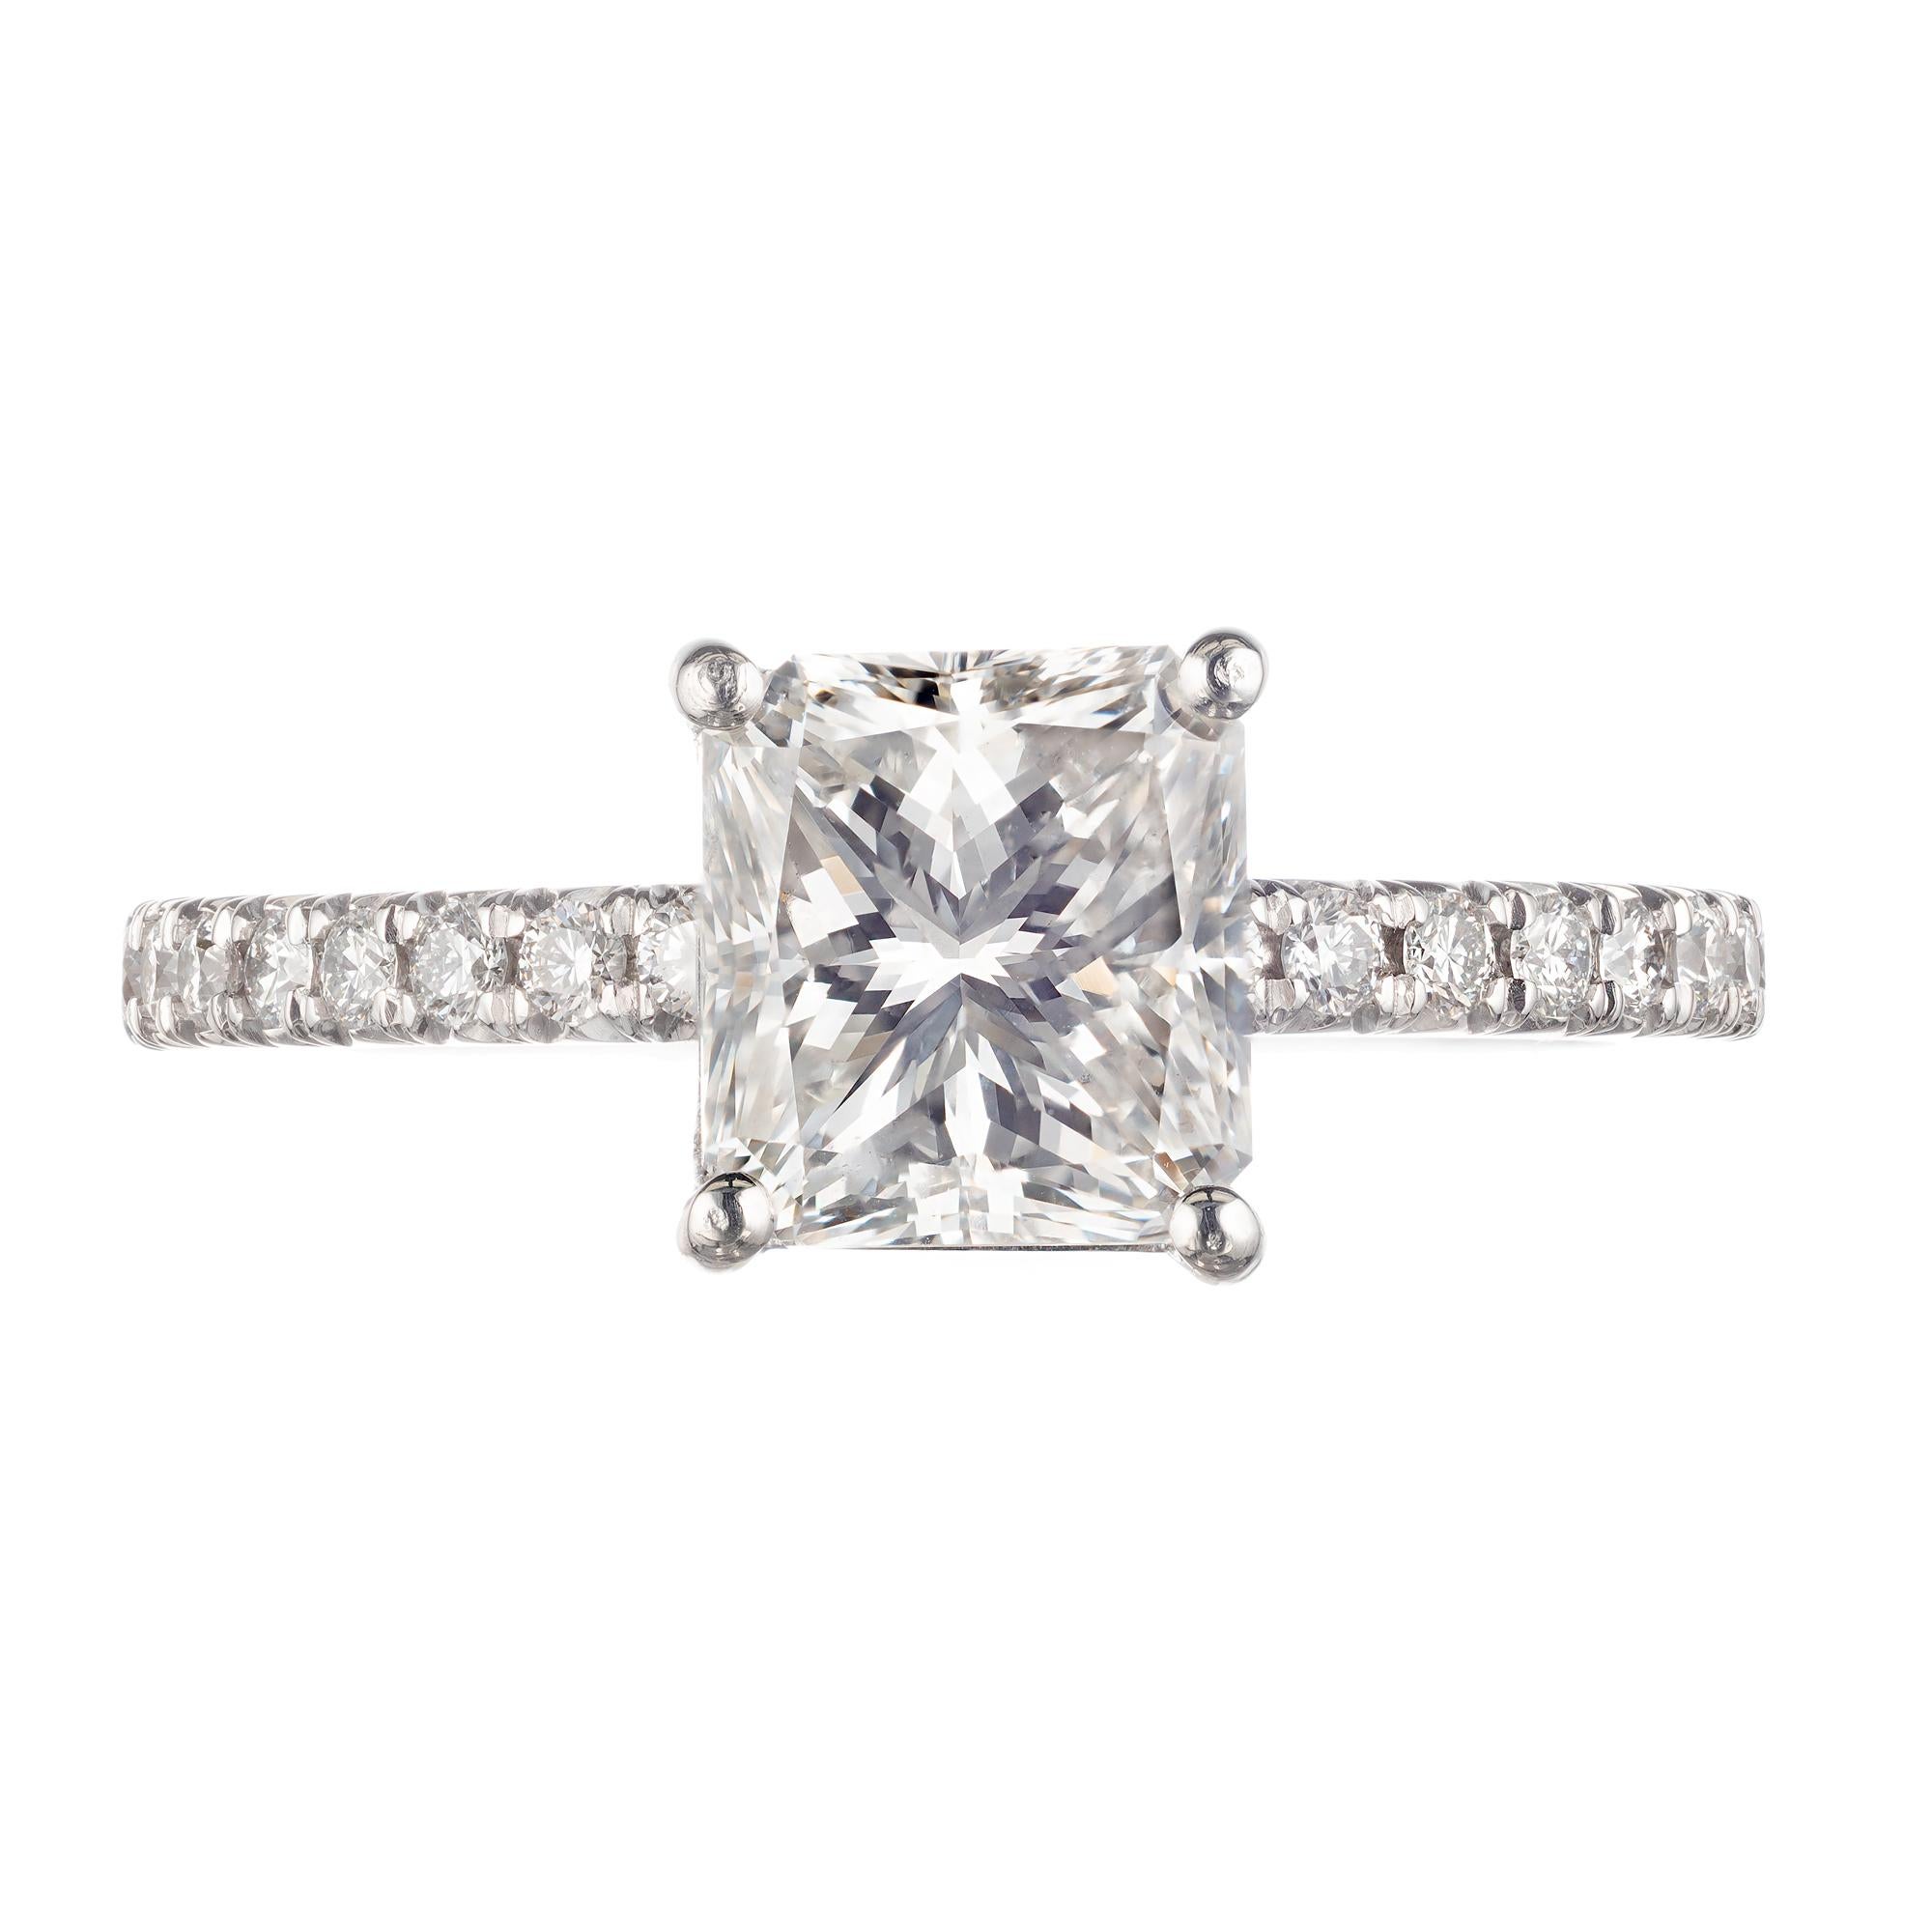 Diamond engagement ring. EGL certified 1.61ct center stone set in a custom made platinum setting with twenty round brilliant cut accent diamonds, from the Peter Suchy Workshop. Designed so that a wedding band can sit flush against the setting. 

1